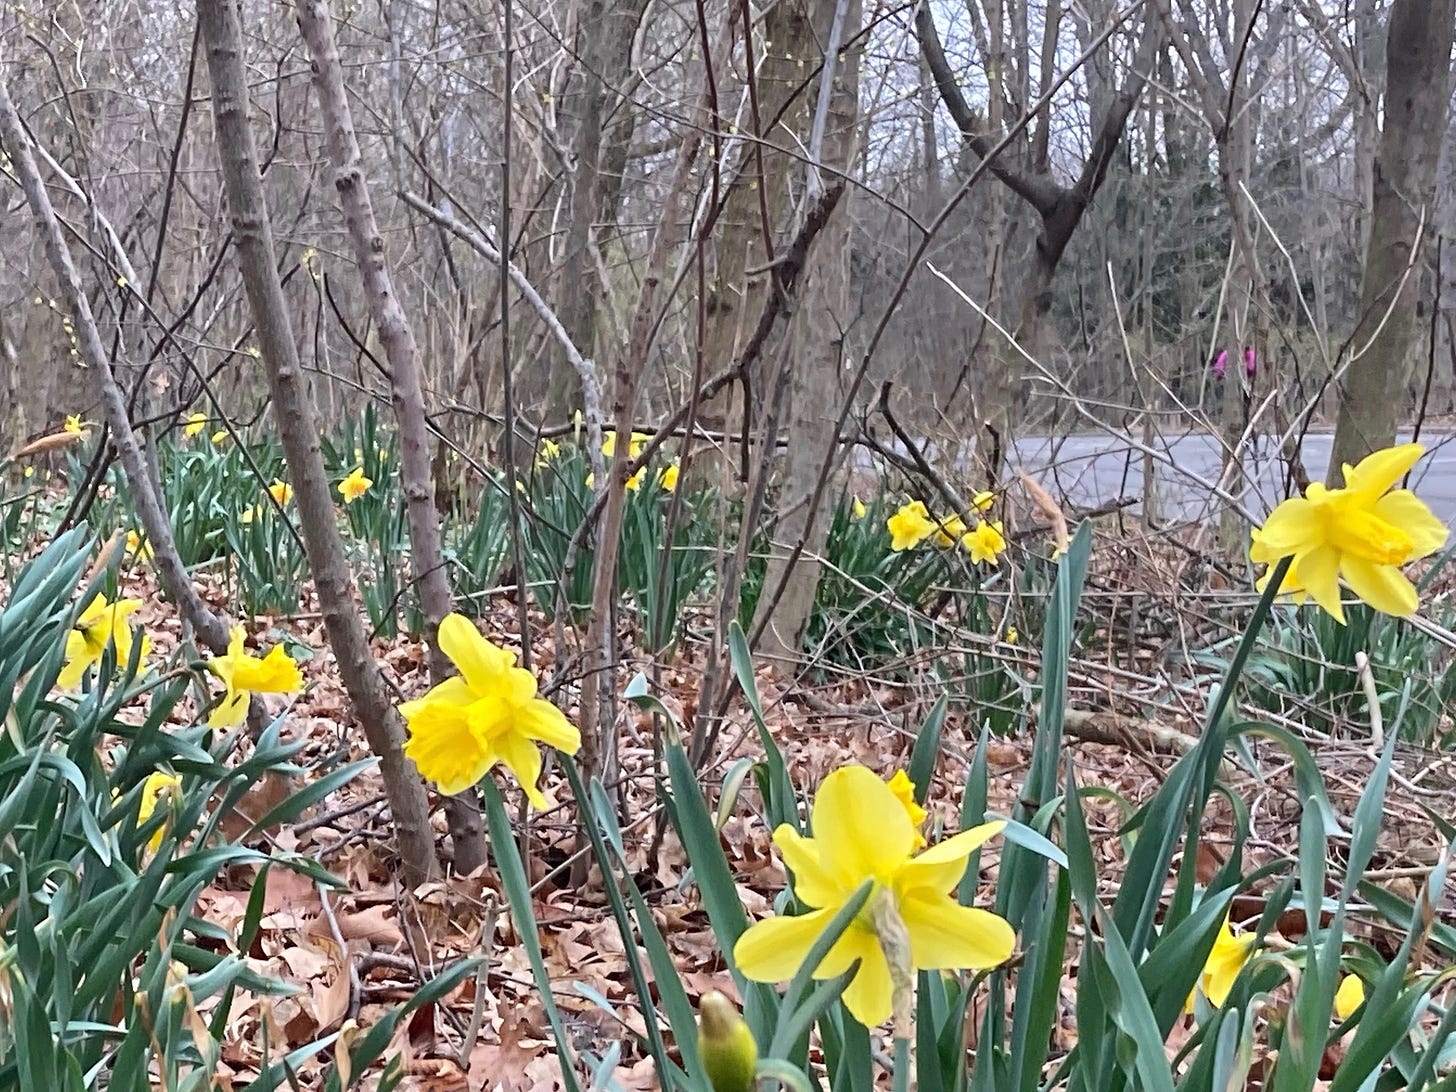 daffodils blooming in the woods